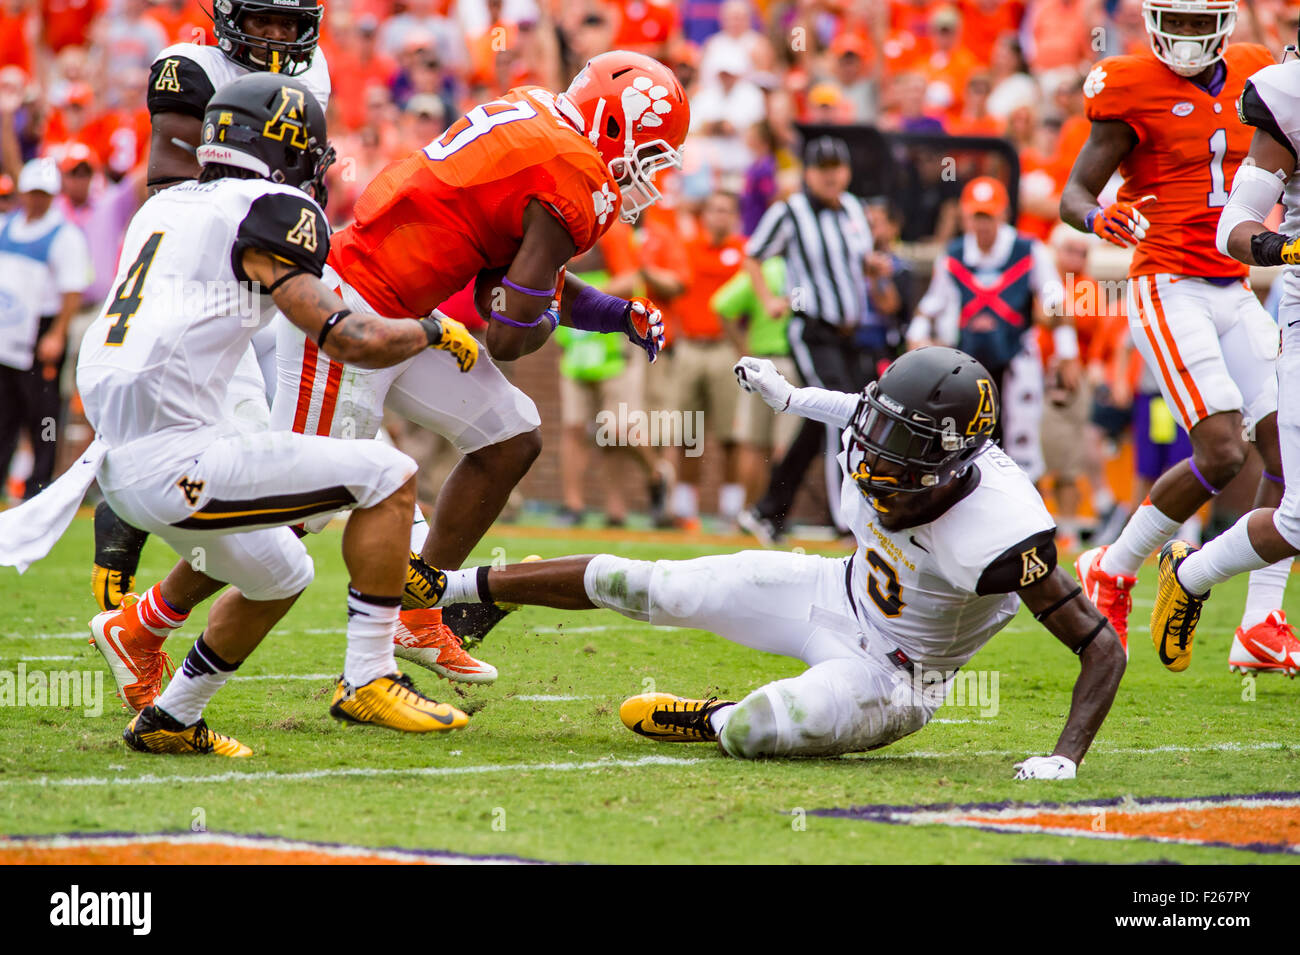 Clemson, South Carolina, USA. 12th Sep, 2015. Clemson Tigers running back Wayne Gallman (9) runs through Appalachian State Mountaineers defensive back Alex Gray (3) at the goal line to score a touchdown Saturday, September 12, 2015 in action during the NCAA Football game between Appalachian State Mountaineers and Clemson Tigers at Death Valley in Clemson, SC. David Grooms/CSM Credit:  Cal Sport Media/Alamy Live News Stock Photo